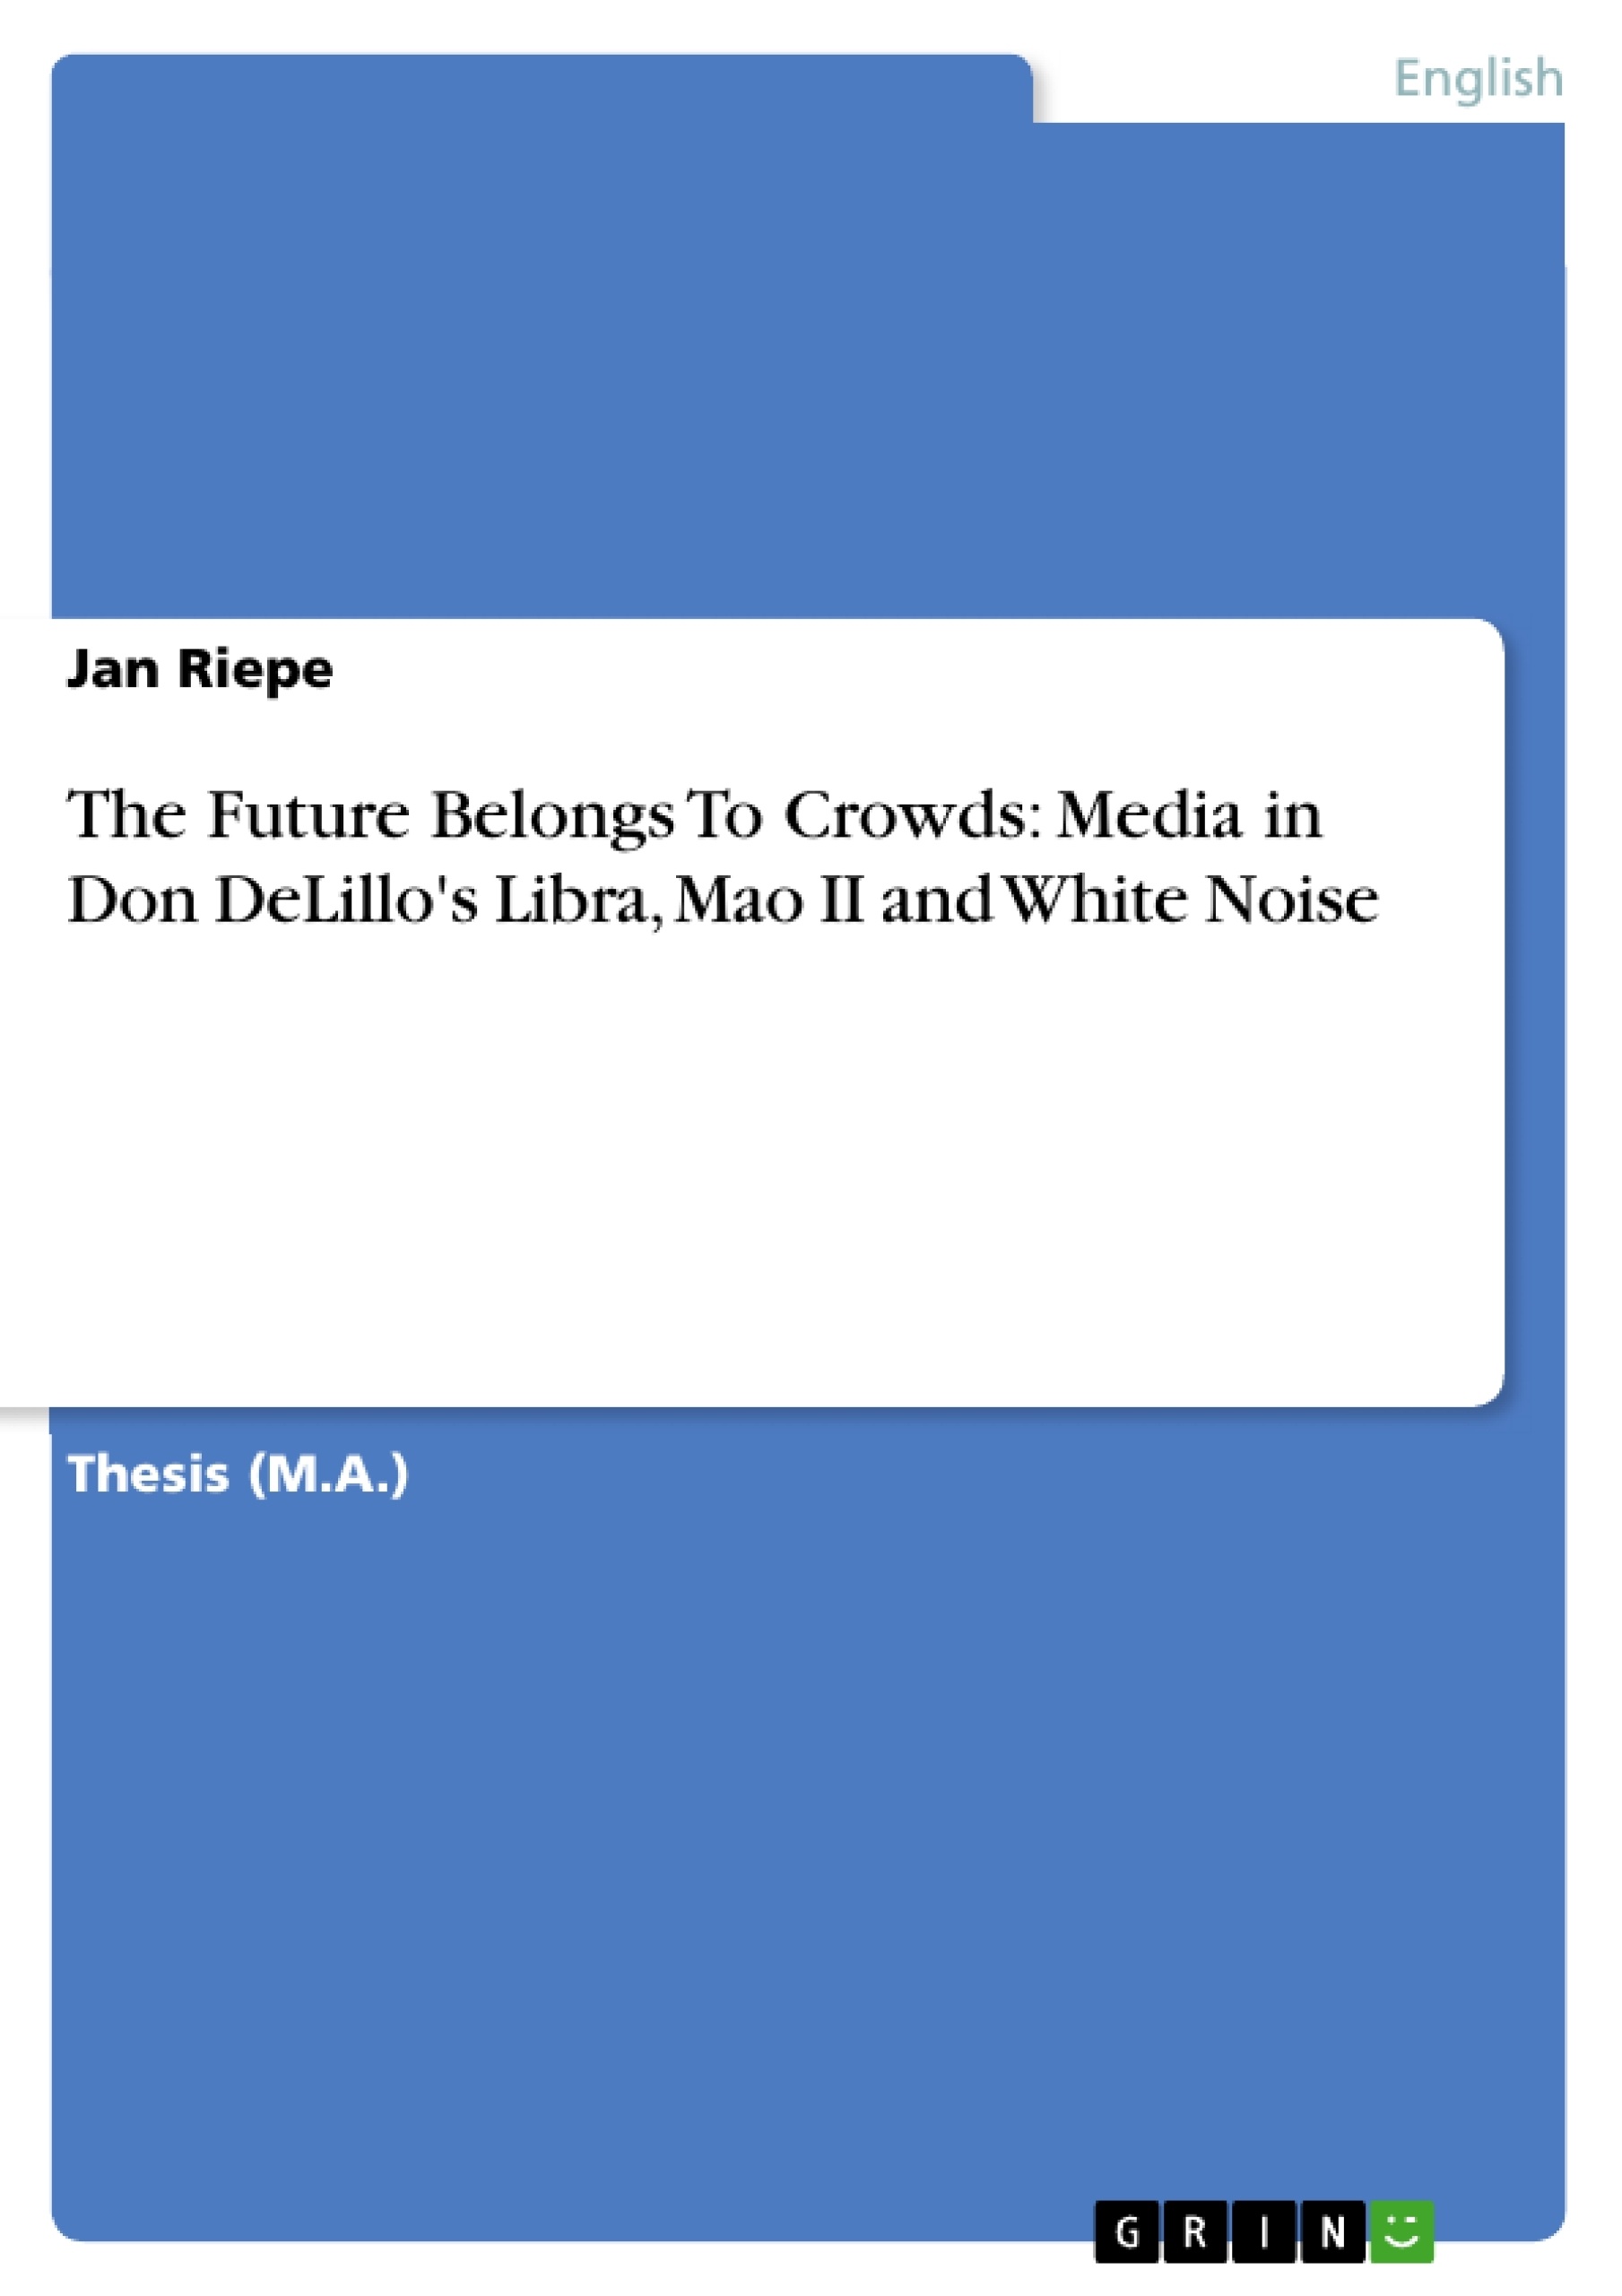 Title: The Future Belongs To Crowds: Media in Don DeLillo's Libra, Mao II and White Noise